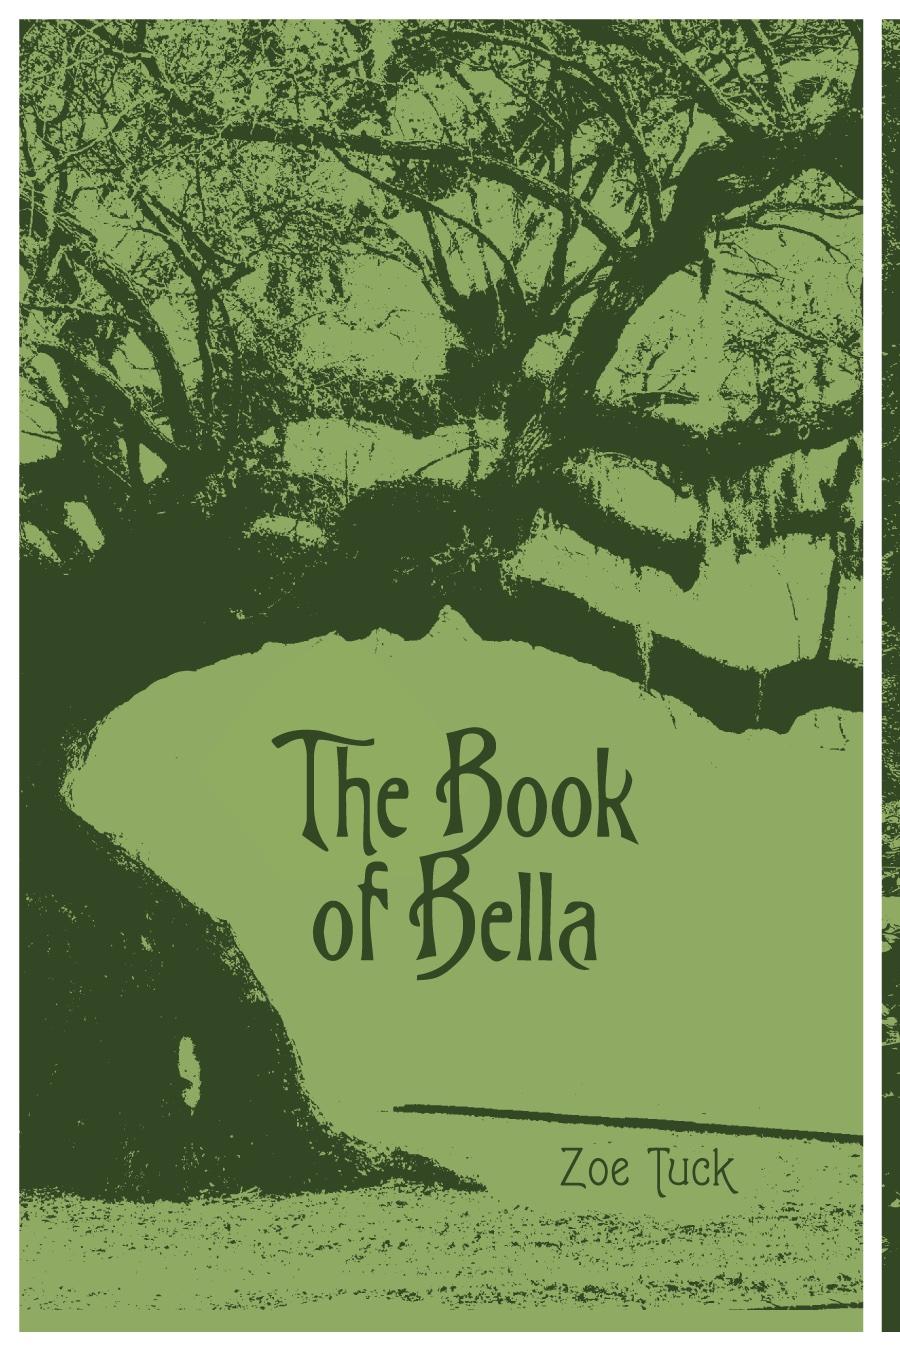 Book cover of the book of bella by zoe_tuck